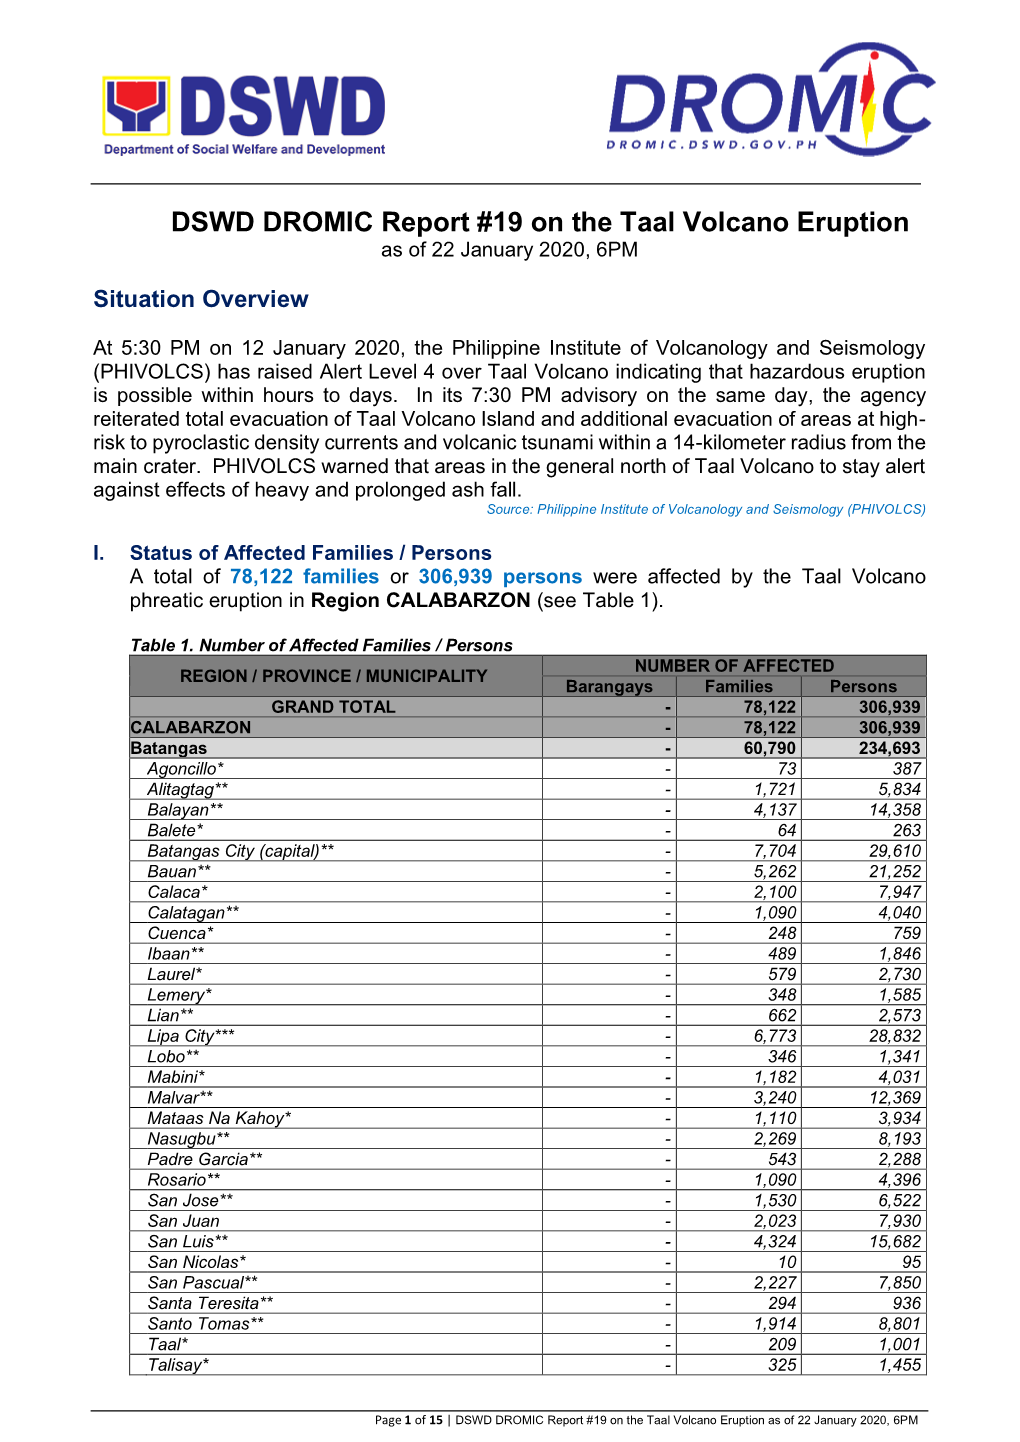 DSWD DROMIC Report #19 on the Taal Volcano Eruption As of 22 January 2020, 6PM